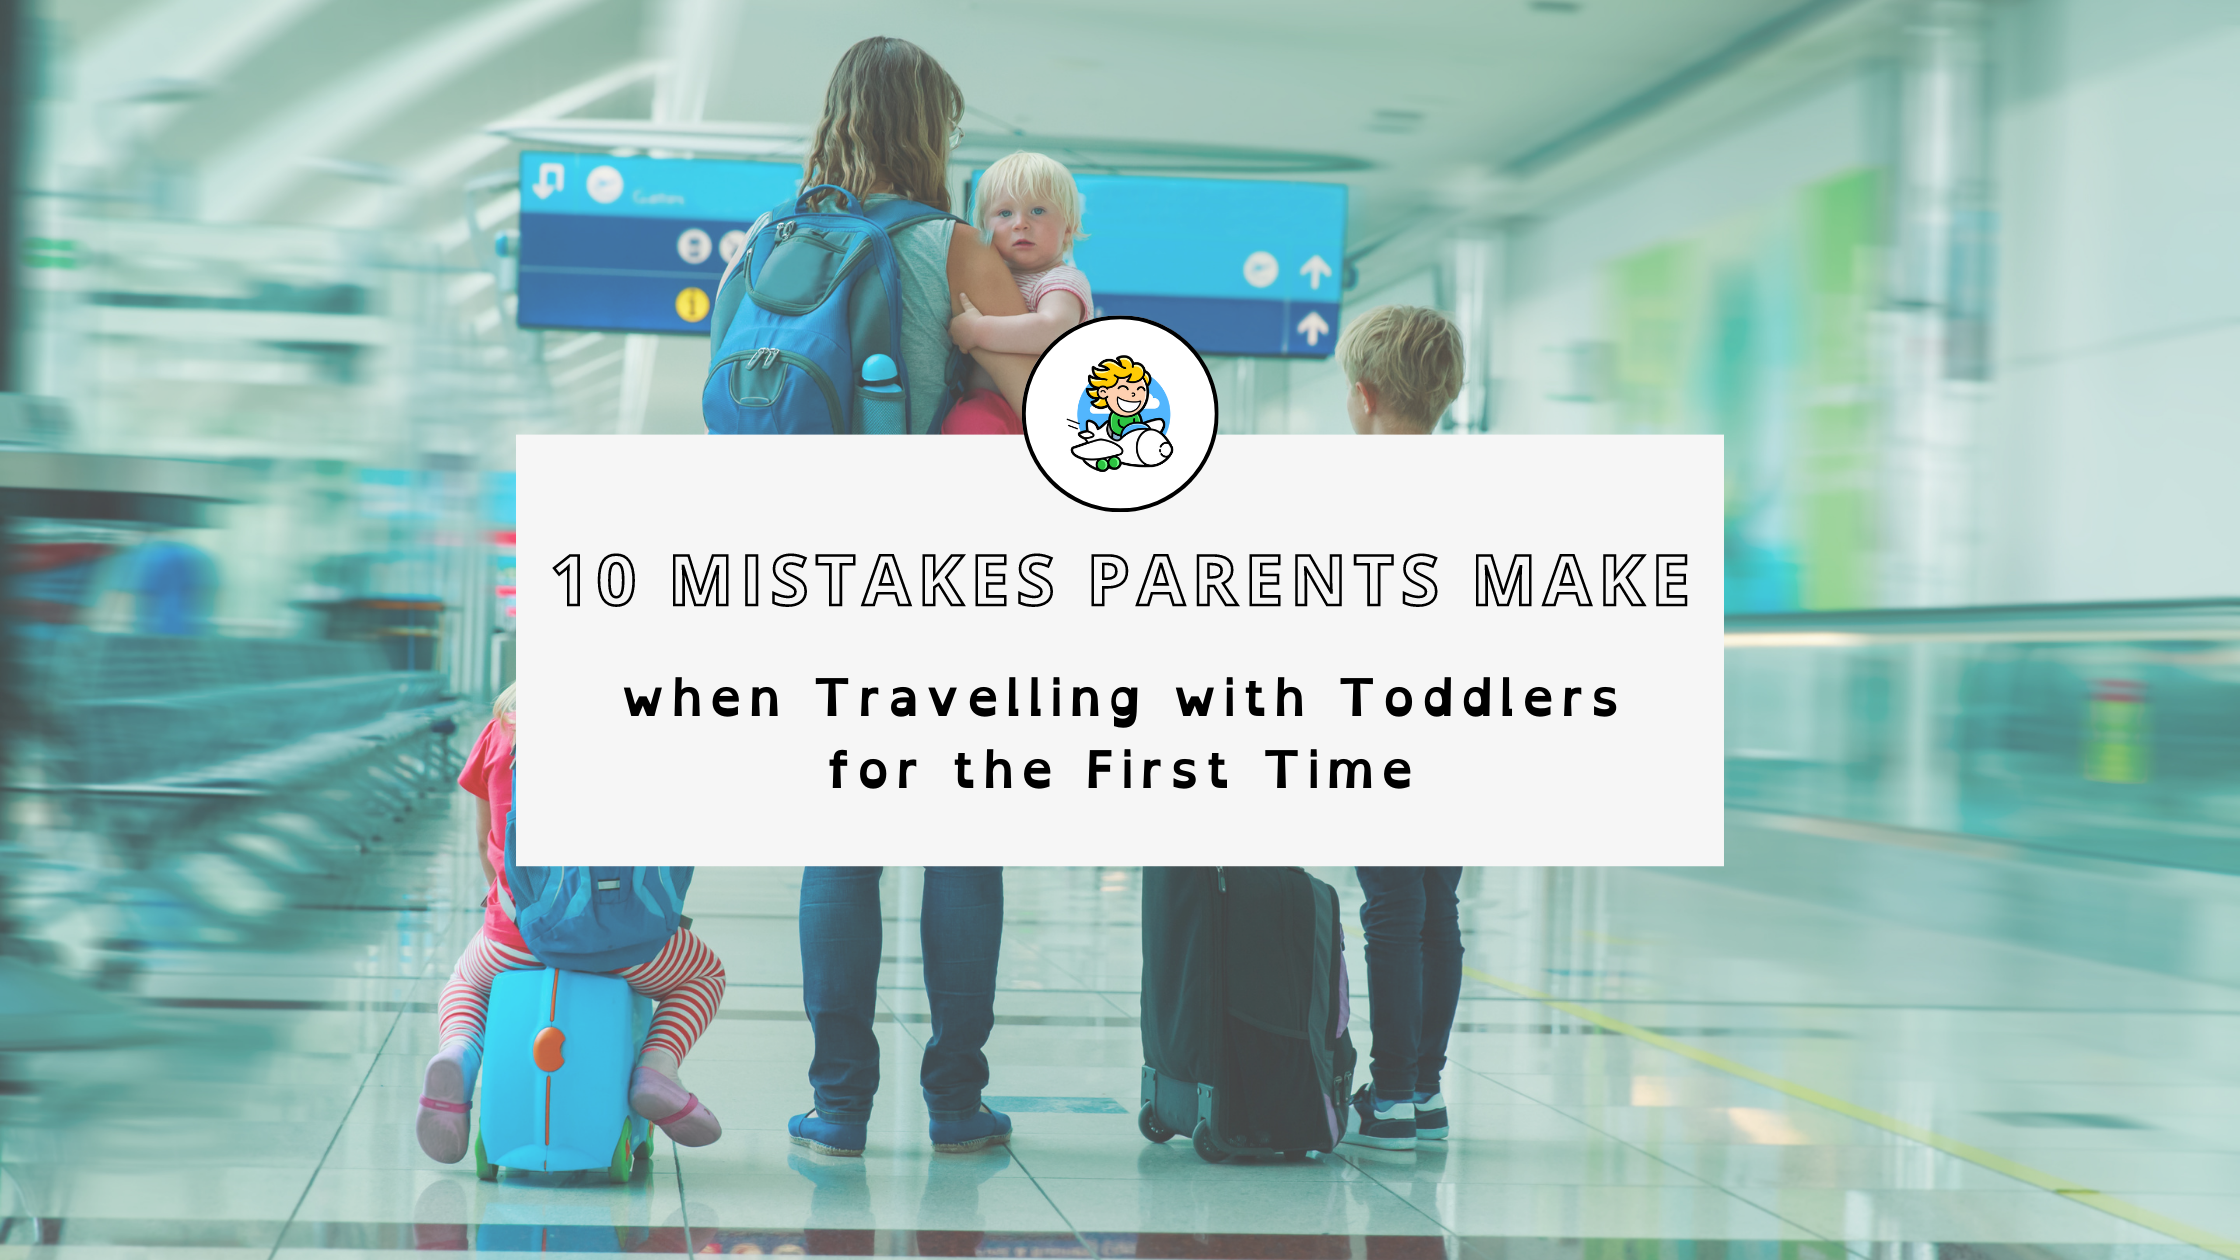 10 Mistakes Parents Make When Travelling with Toddlers for the First Time